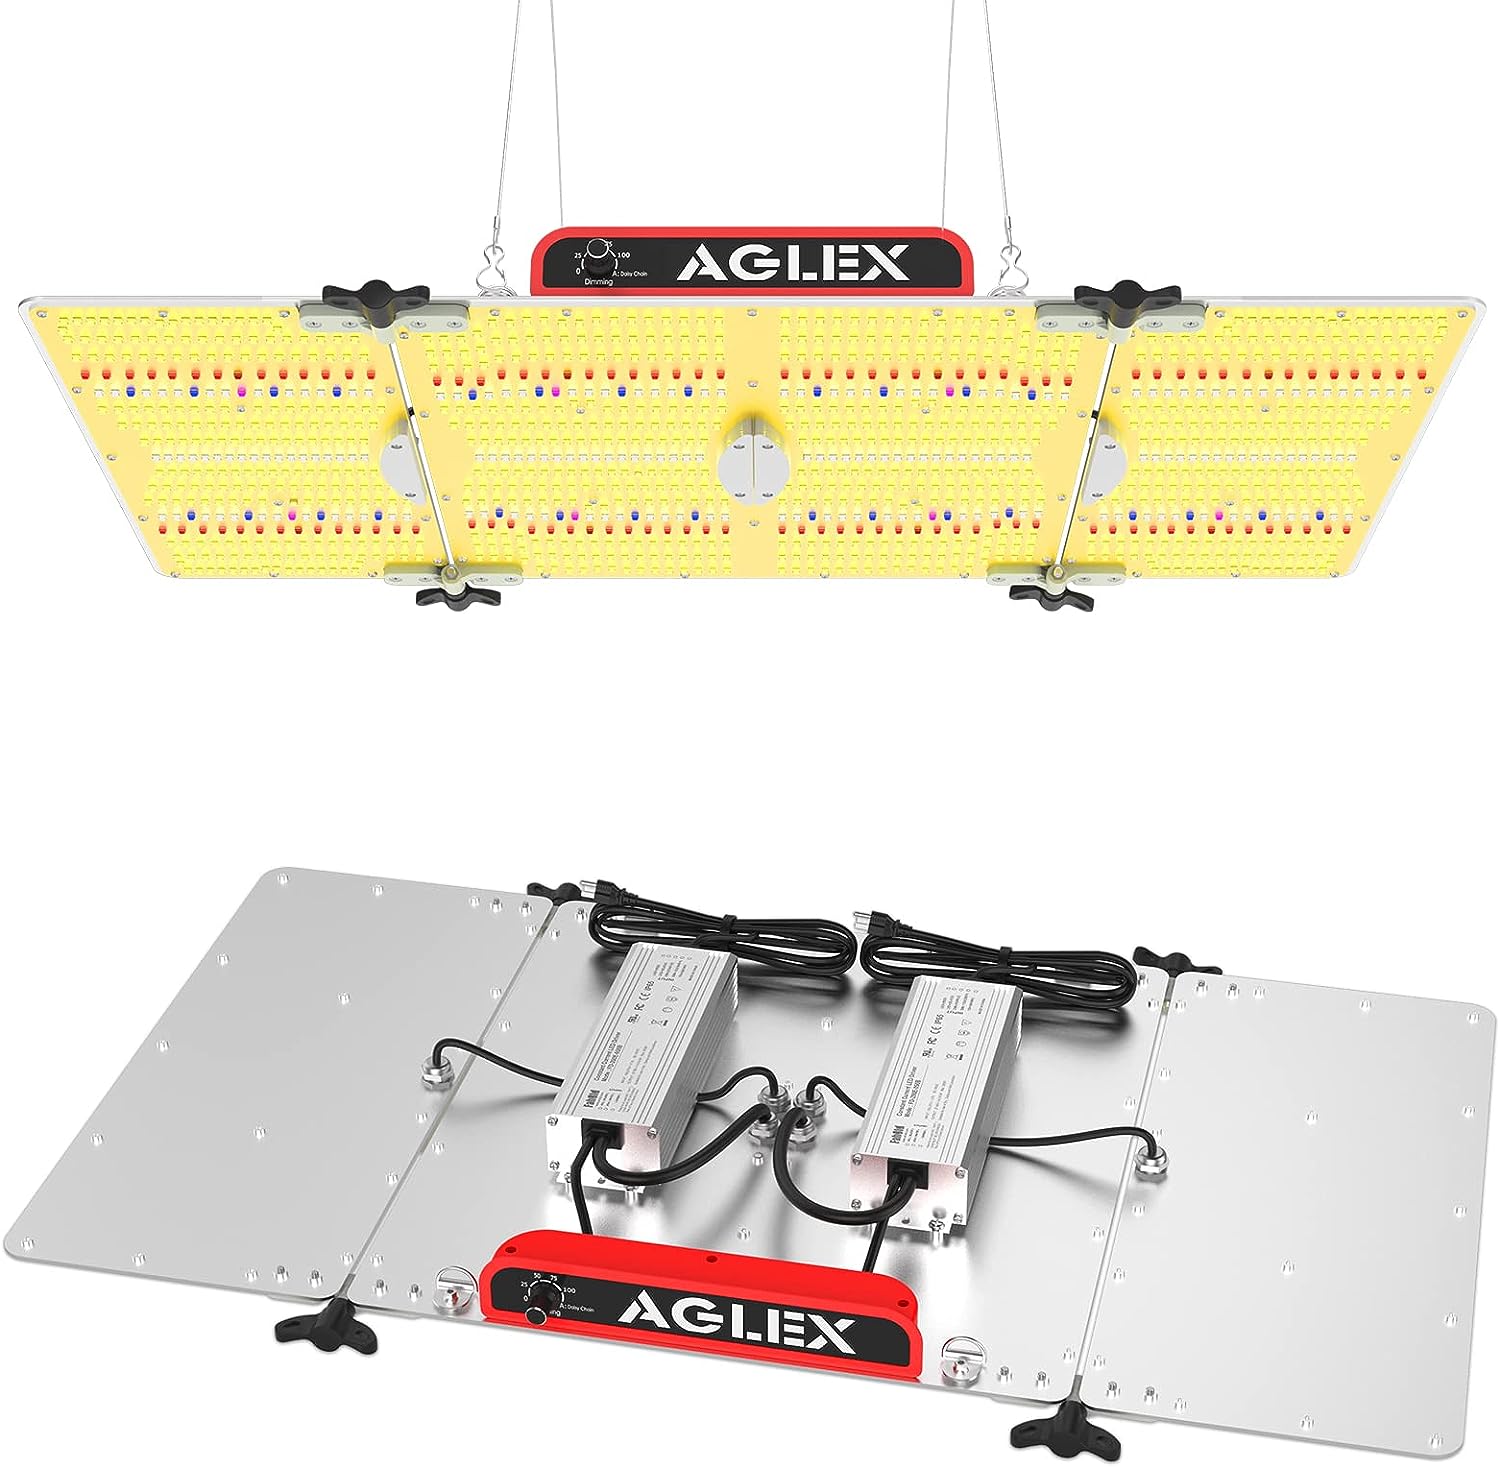 AGLEX 4000W LED Grow Light, Full Spectrum Grow Light with UV IR, LED Plant Grow Lights for Seeding Starting Veg Flower Hanging Growing Lamps 5X6 FT Coverage with Daisy Chain  Dimmable